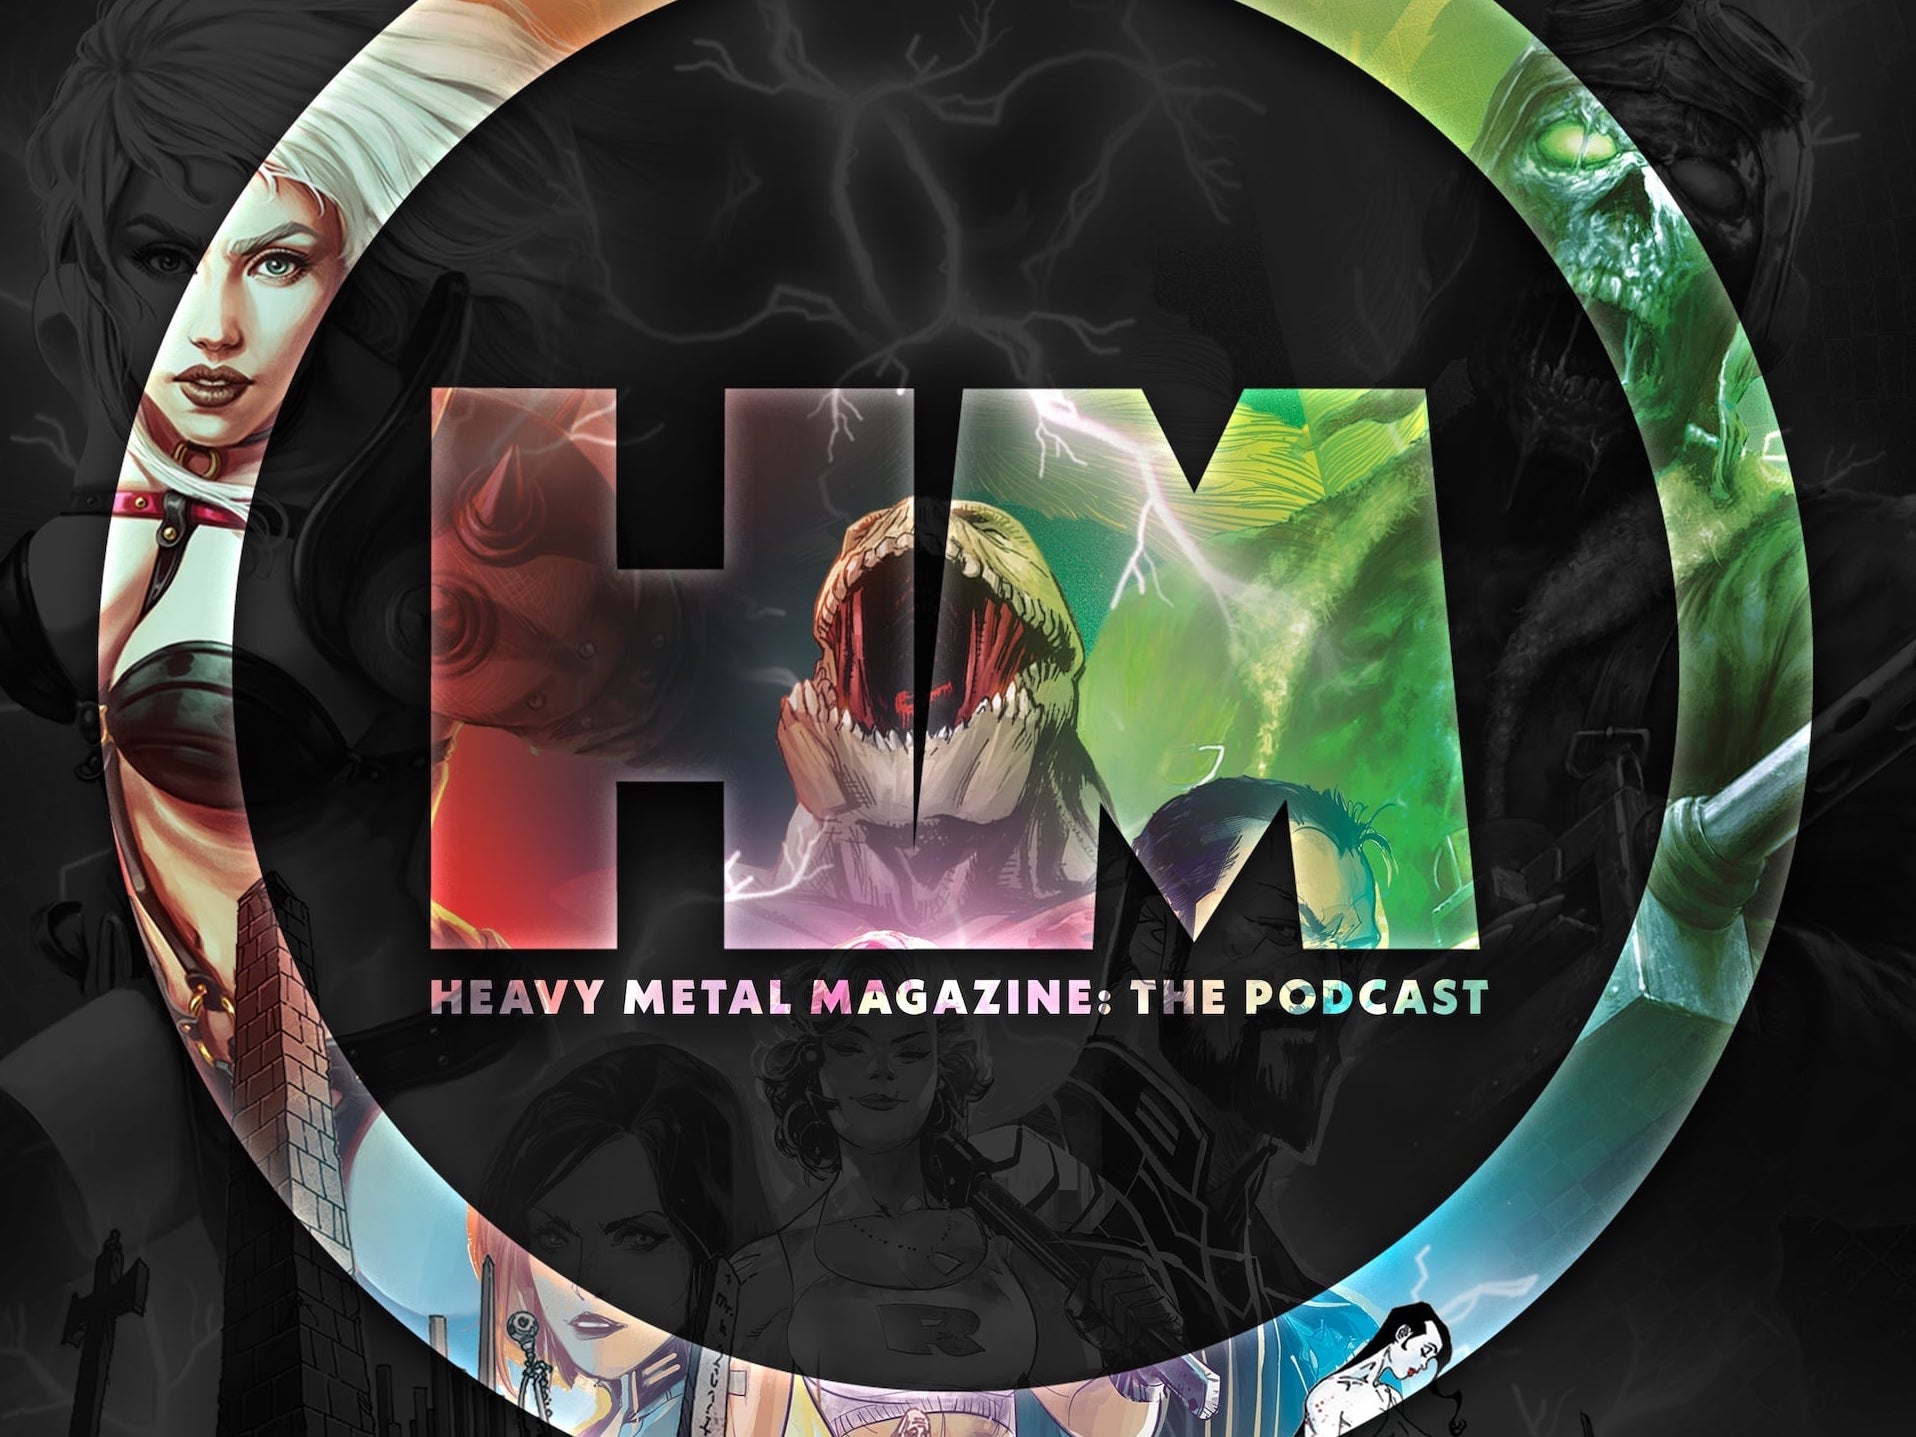 Heavy Metal Entertainment to launch 'Heavy Metal Magazine: The Podcast'